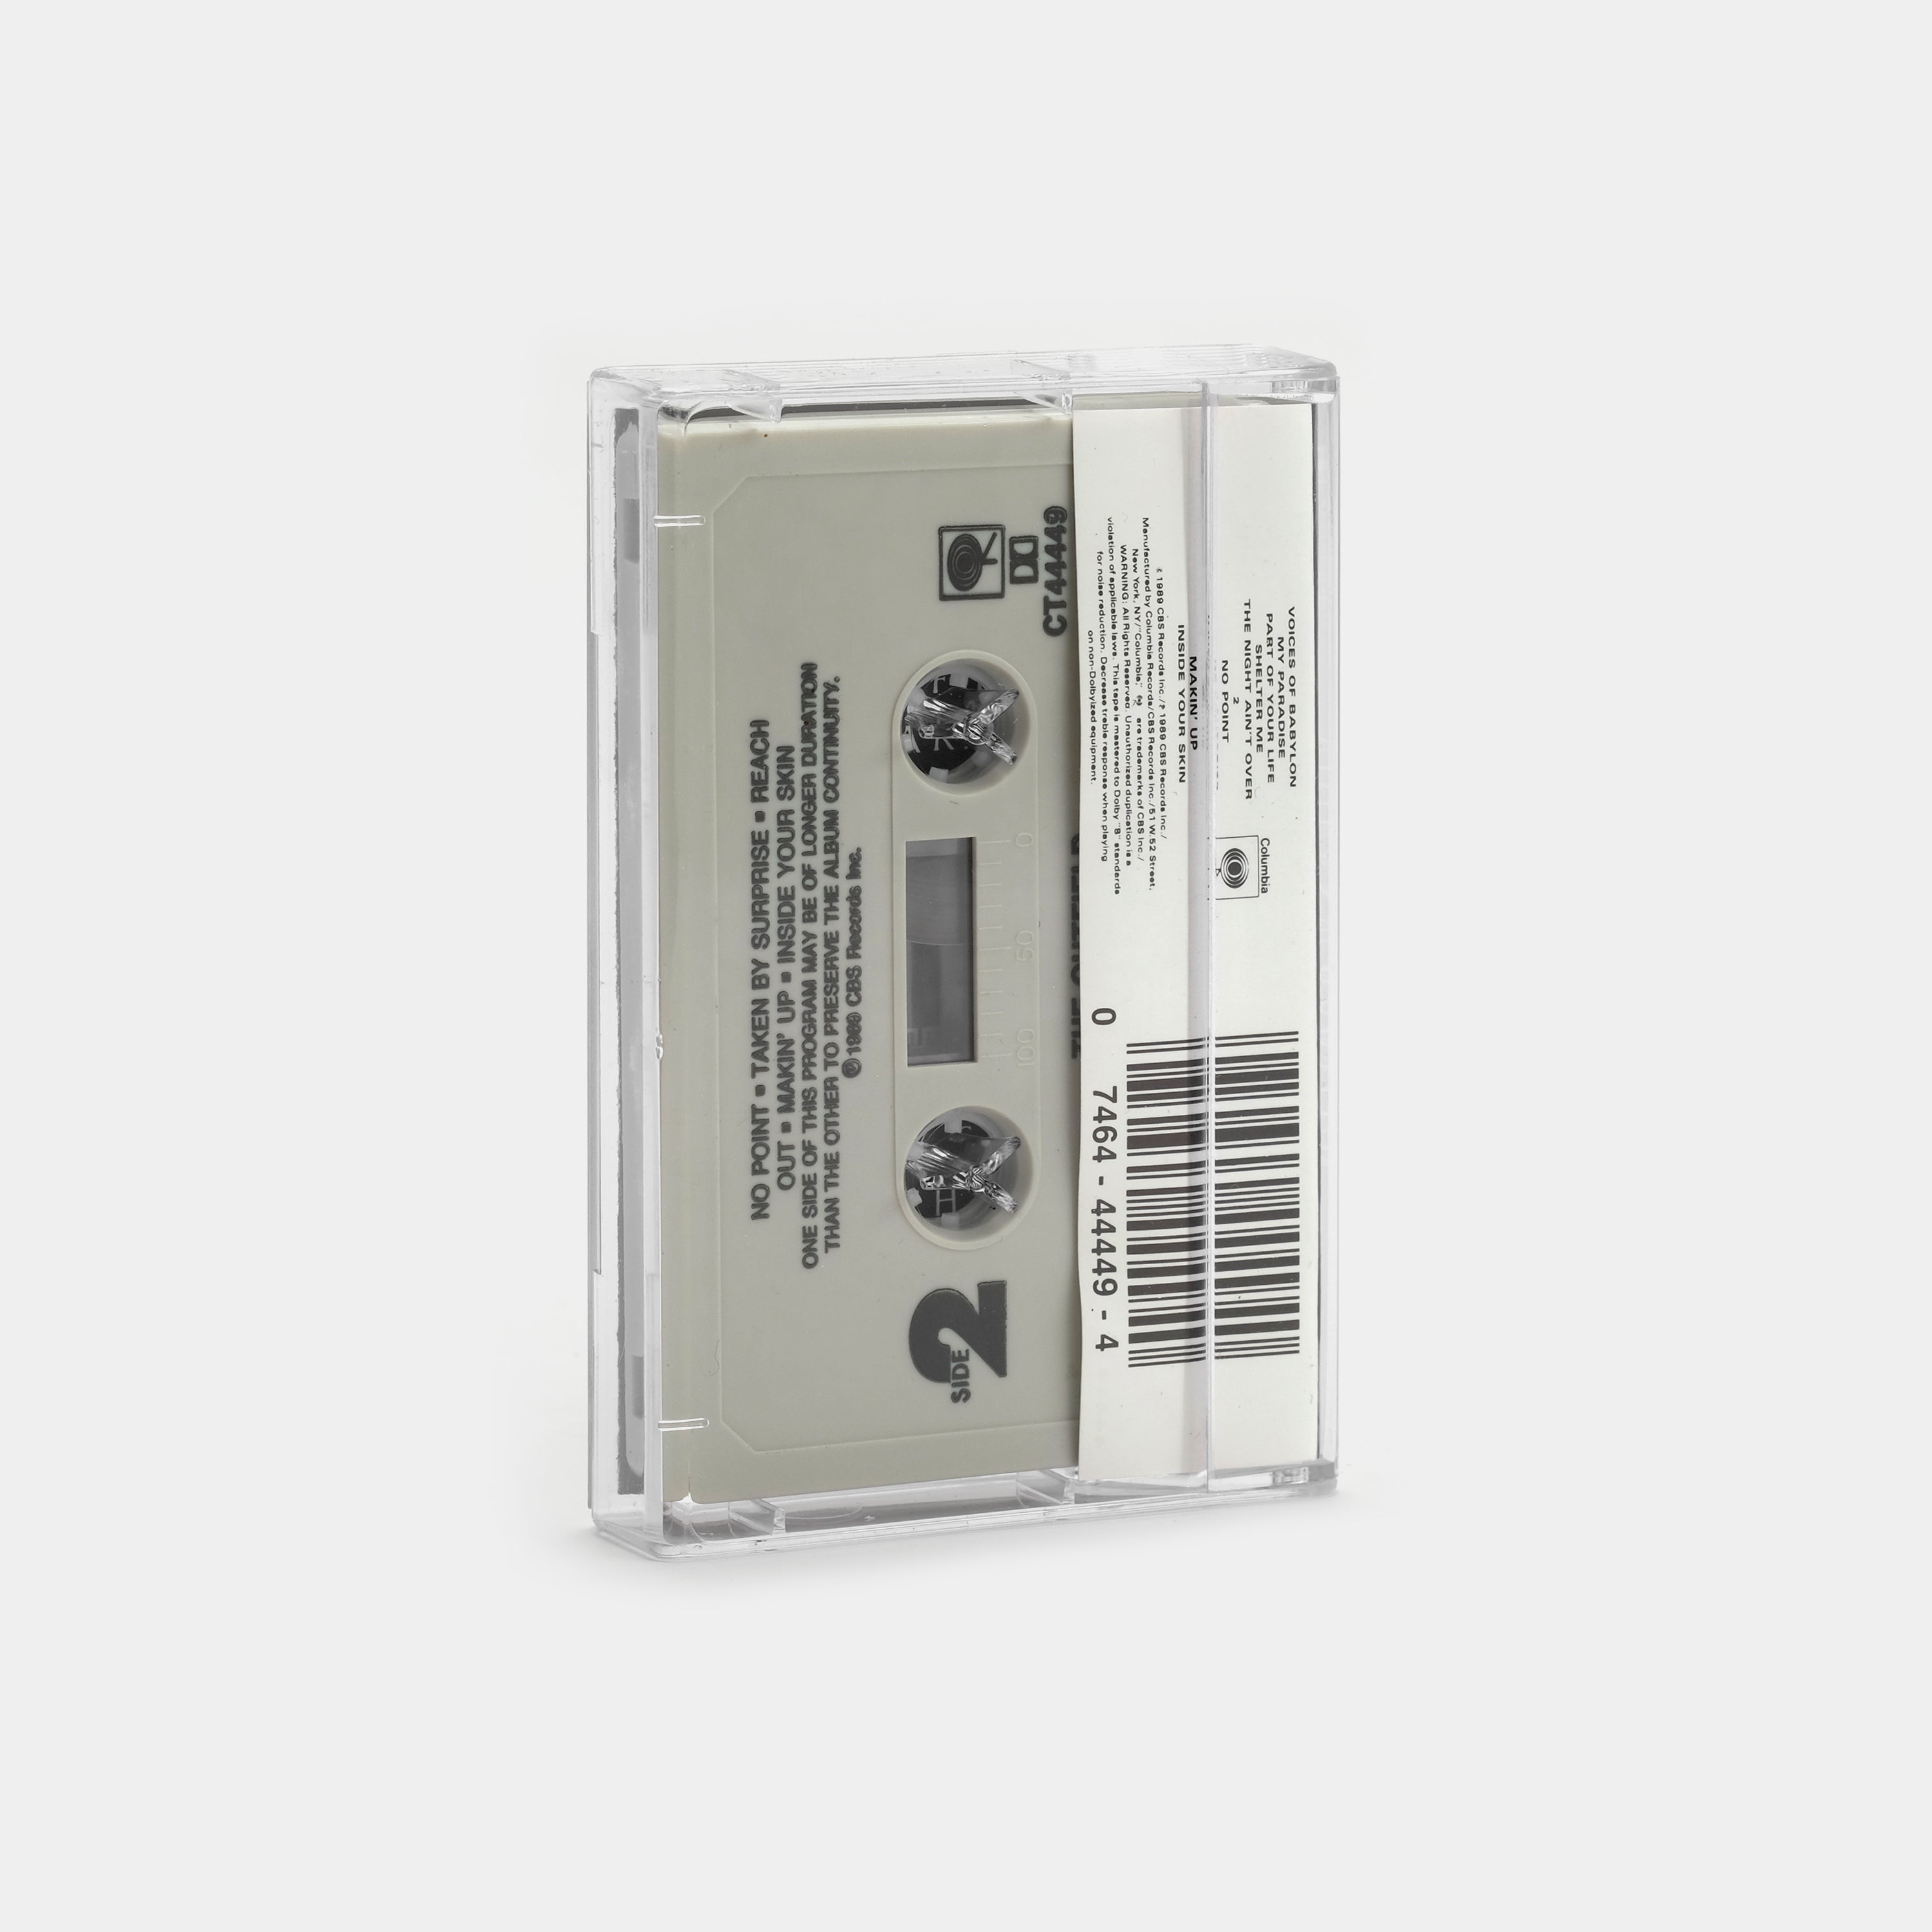 The Outfield - Voices of Babylon Cassette Tape